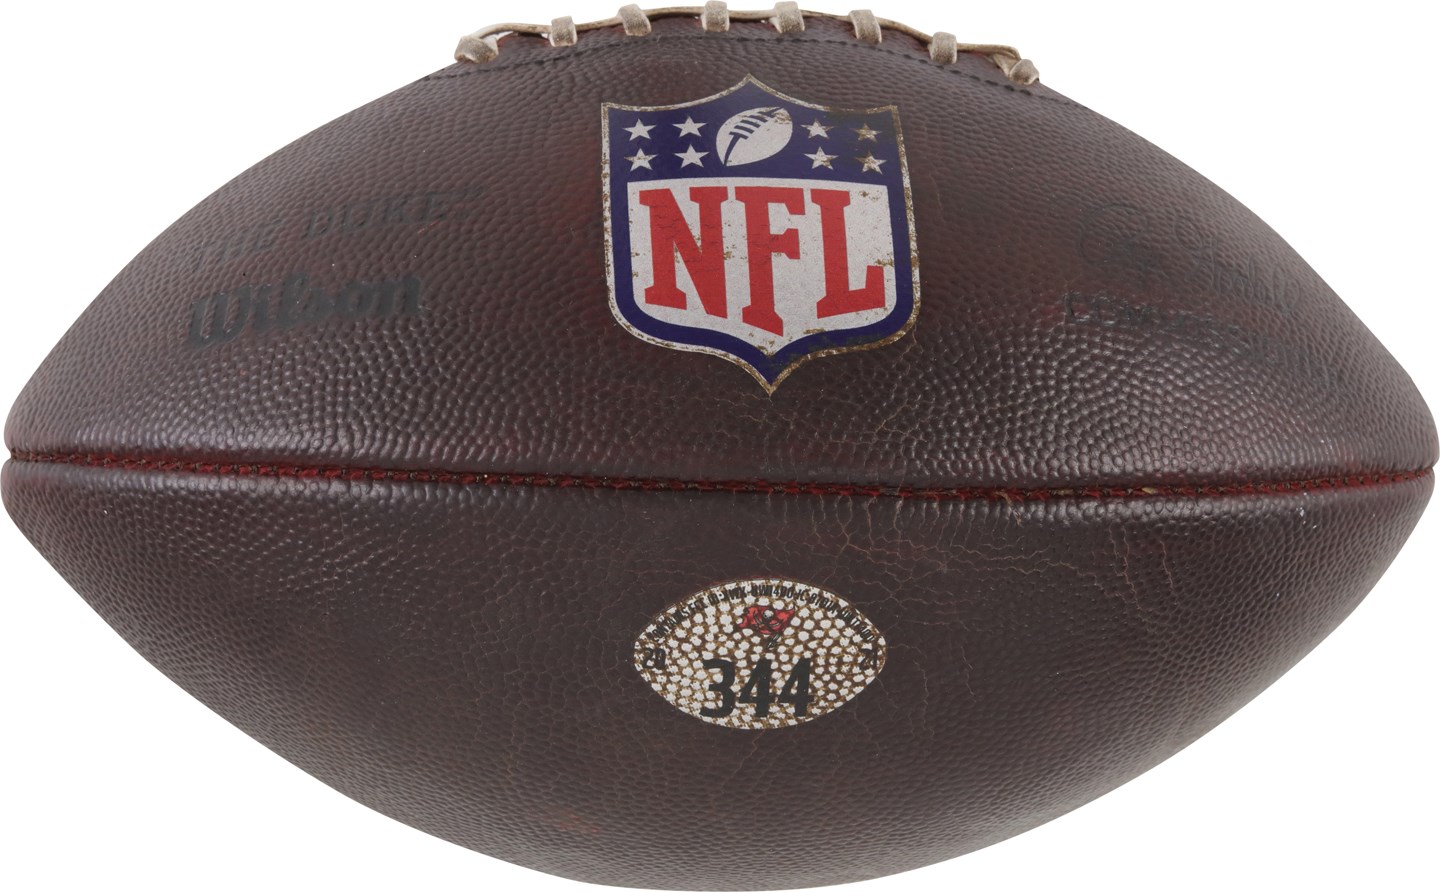 - 1/14/21 Tom Brady Game Used Touchdown Football to Mike Evans for Evans' 71st Career Touchdown - Ties Buccaneers All-Time TD Record (Photo-Matched & Fan Provenance)